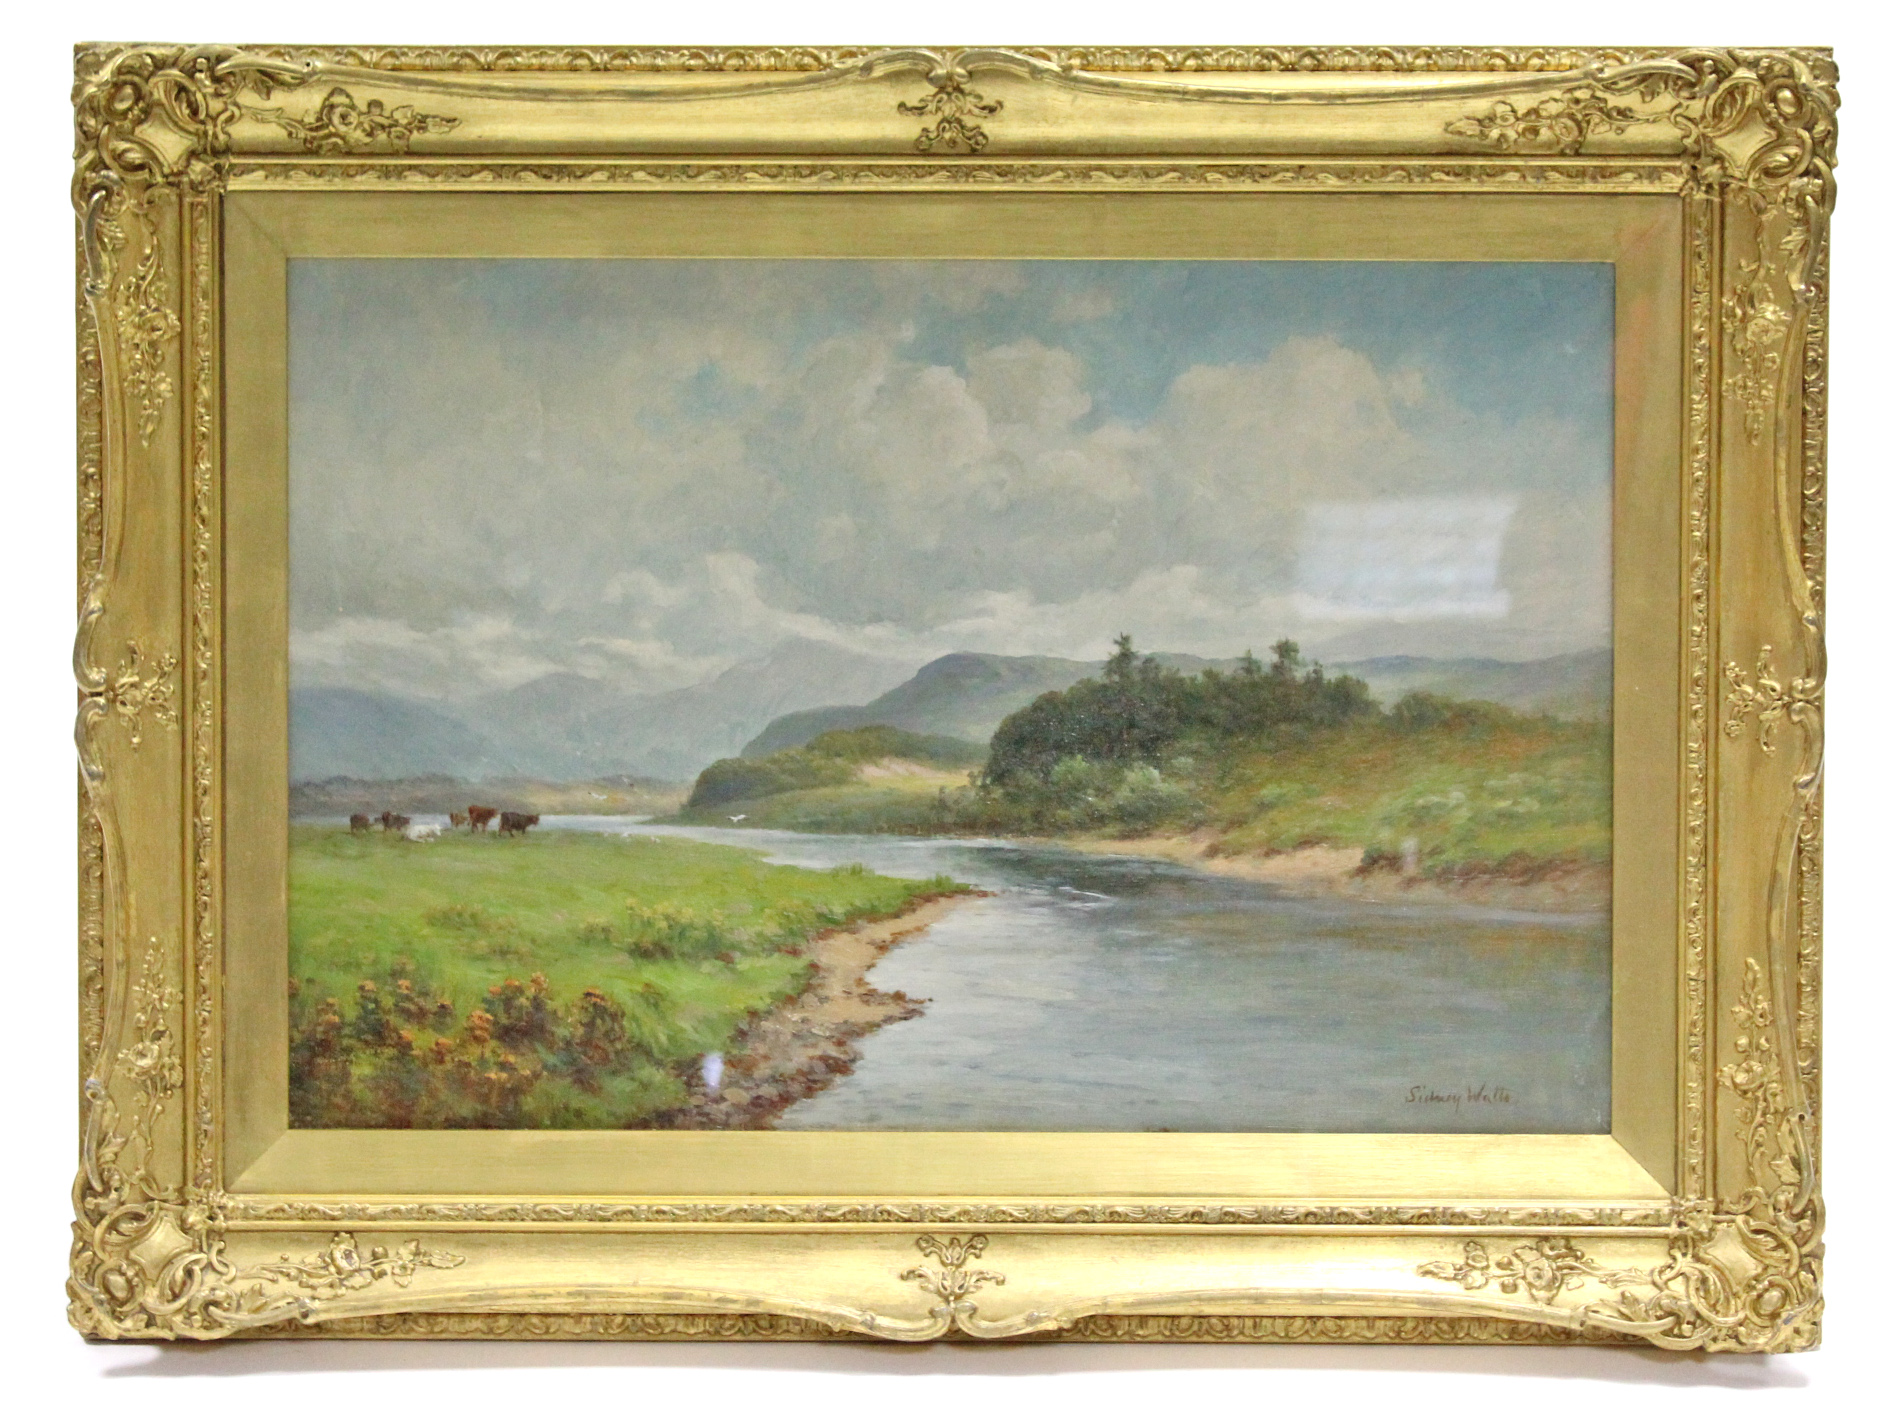 WATTS, Sidney (19th century). A pair of rural river landscapes, titled: “On the Sever Nr